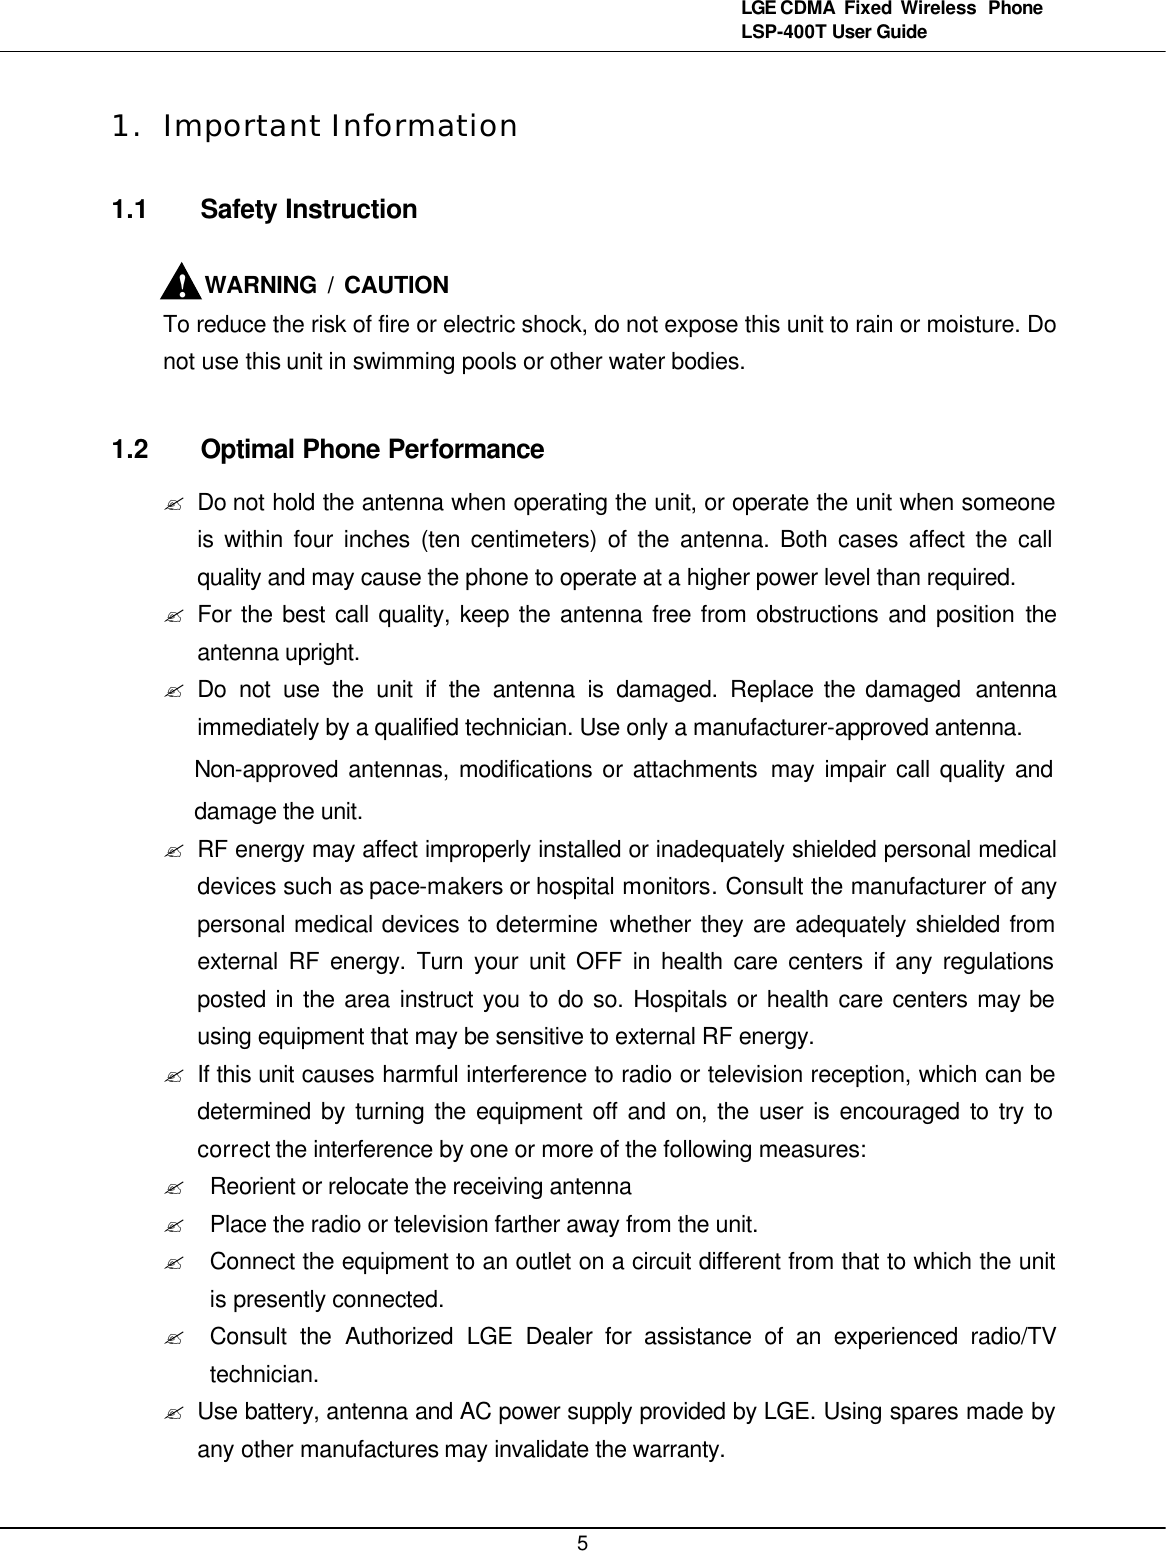   5LGE CDMA Fixed Wireless  Phone LSP-400T User Guide 1. Important Information 1.1 Safety Instruction      WARNING / CAUTION To reduce the risk of fire or electric shock, do not expose this unit to rain or moisture. Do not use this unit in swimming pools or other water bodies.  1.2 Optimal Phone Performance ? Do not hold the antenna when operating the unit, or operate the unit when someone is within four inches (ten centimeters) of the antenna. Both cases affect the call quality and may cause the phone to operate at a higher power level than required. ? For the best call quality, keep the antenna free from obstructions and position  the antenna upright. ? Do not use the unit if the antenna is damaged. Replace the damaged  antenna immediately by a qualified technician. Use only a manufacturer-approved antenna.   Non-approved antennas, modifications or attachments may impair call quality and damage the unit. ? RF energy may affect improperly installed or inadequately shielded personal medical devices such as pace-makers or hospital monitors. Consult the manufacturer of any personal medical devices to determine whether they are adequately shielded from external RF energy. Turn your unit OFF in health care centers if any regulations posted in the area instruct you to do so. Hospitals or health care centers may be using equipment that may be sensitive to external RF energy. ? If this unit causes harmful interference to radio or television reception, which can be determined by turning the equipment off and on, the user is encouraged to try to correct the interference by one or more of the following measures: ? Reorient or relocate the receiving antenna ? Place the radio or television farther away from the unit. ? Connect the equipment to an outlet on a circuit different from that to which the unit is presently connected. ? Consult the Authorized LGE Dealer for assistance of an experienced radio/TV technician. ? Use battery, antenna and AC power supply provided by LGE. Using spares made by any other manufactures may invalidate the warranty. ! 